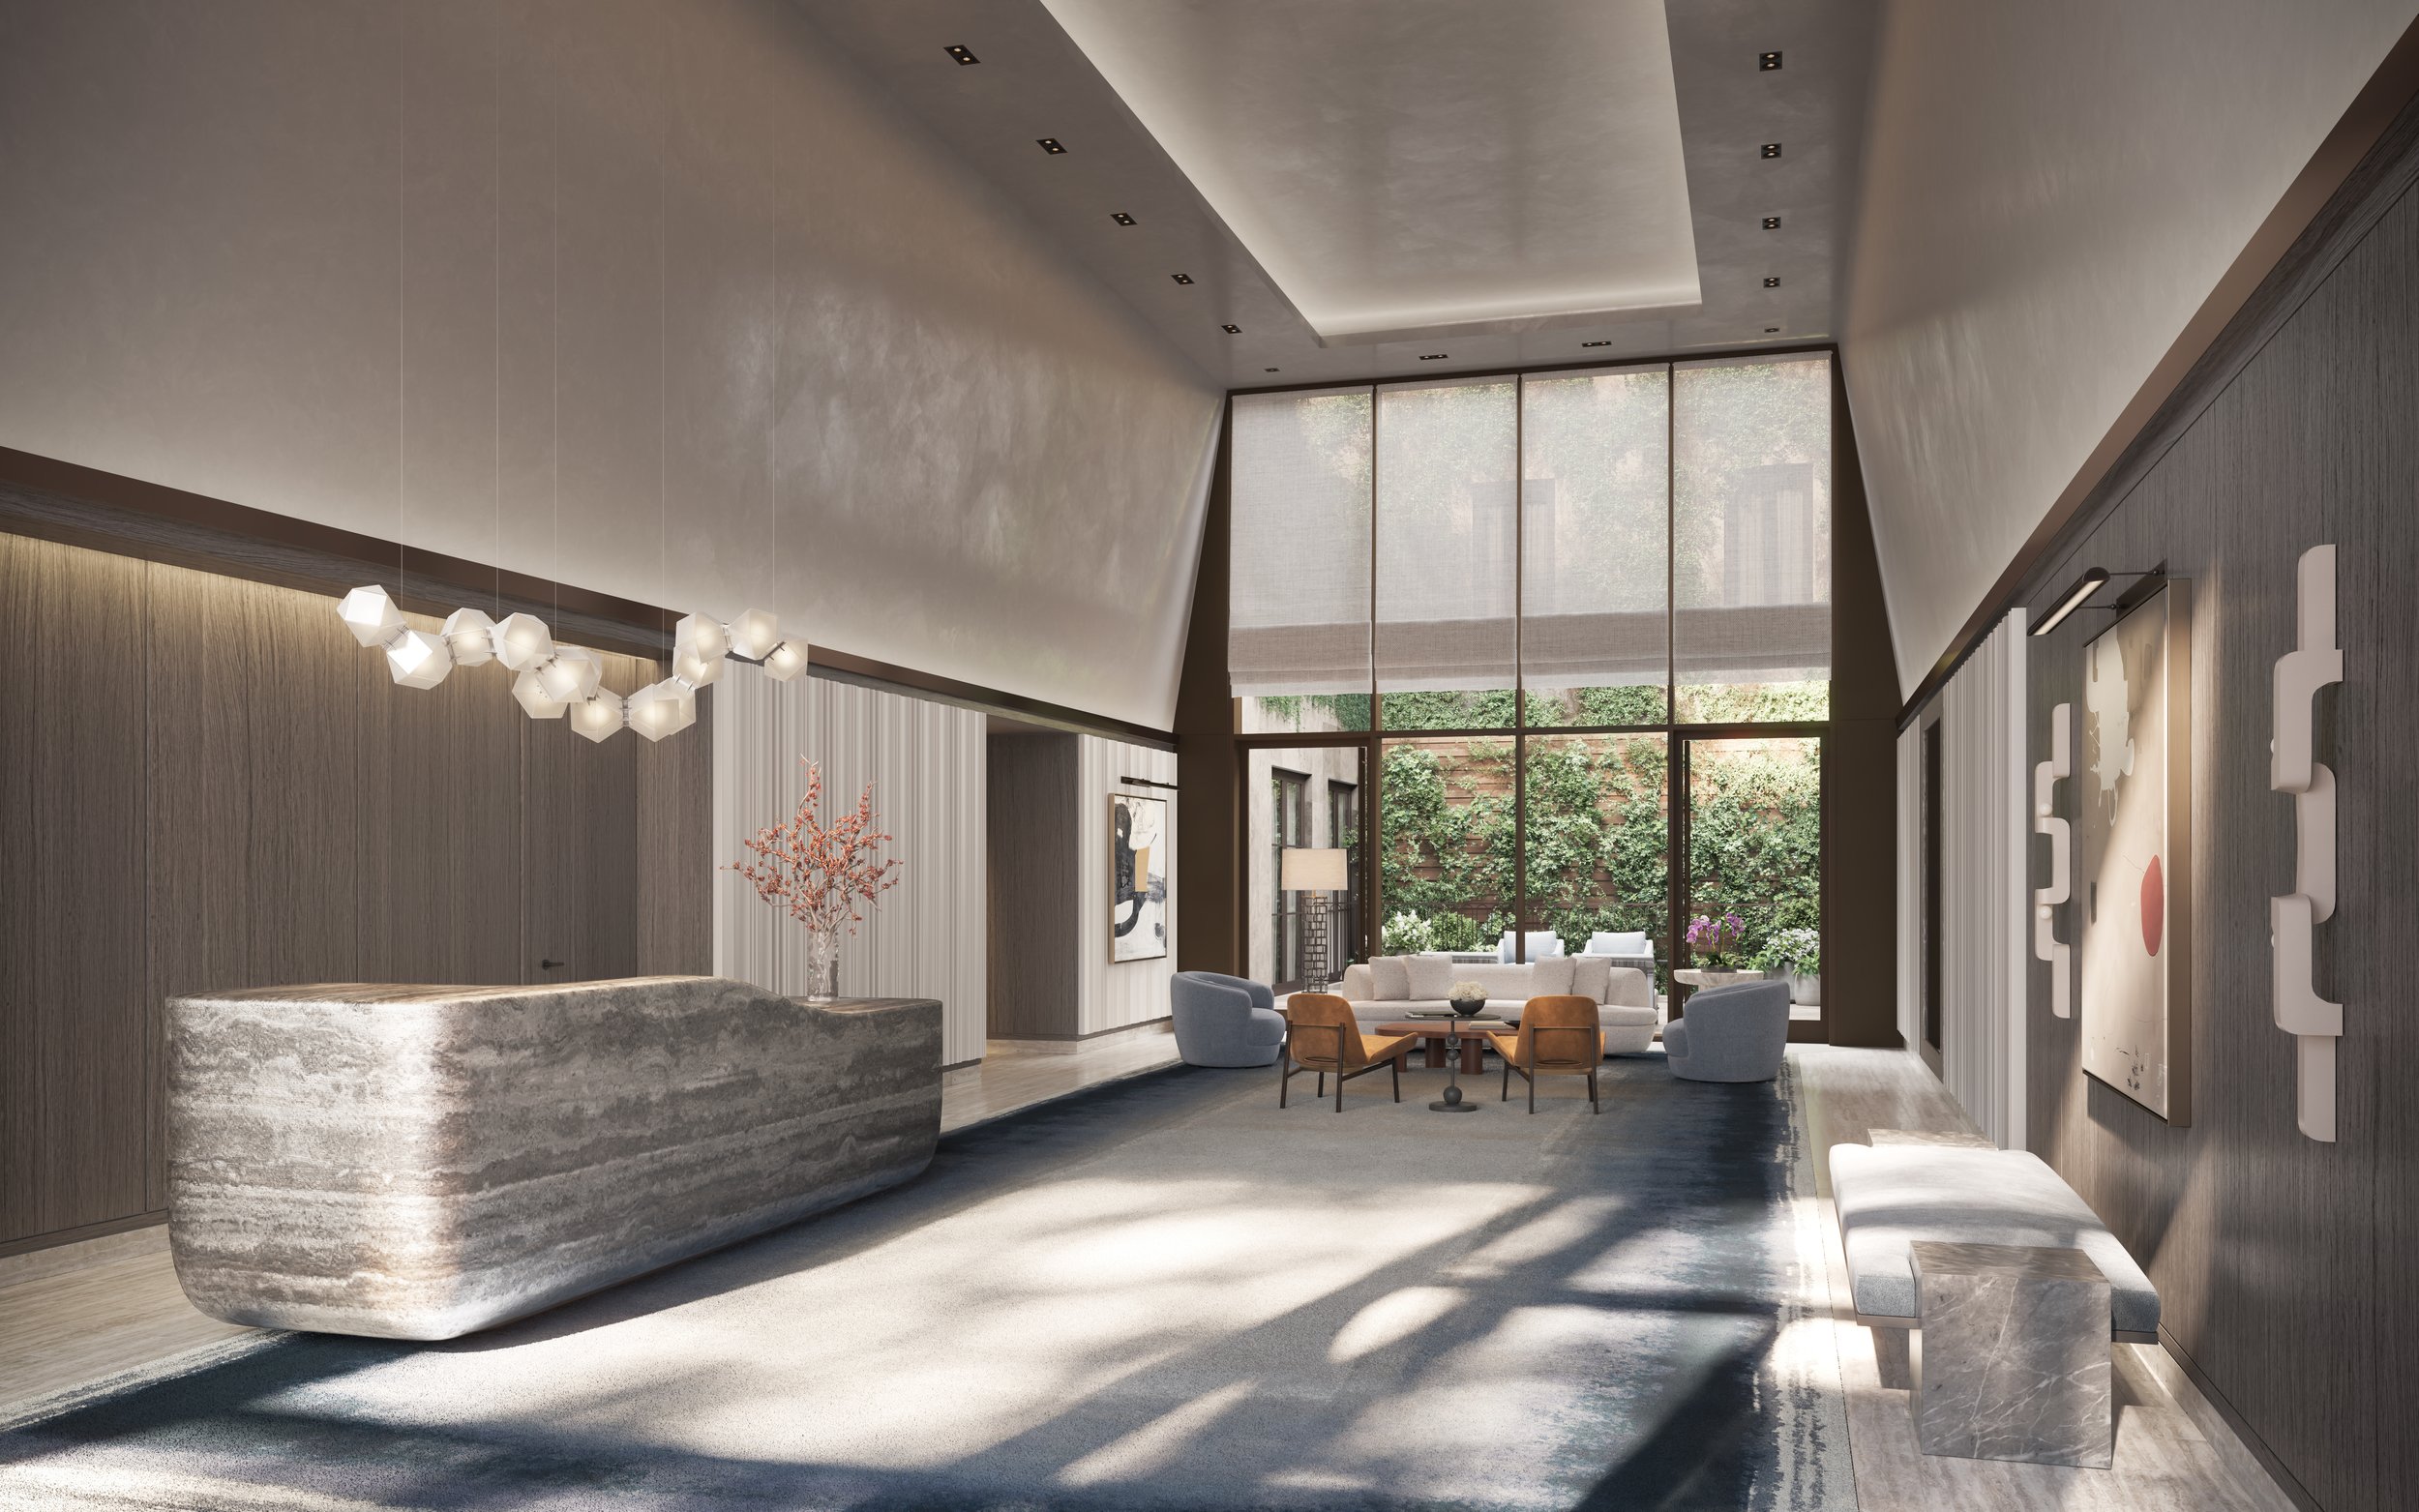  “As a long-time Upper Westsider myself, this project was very personal. In fact, my family will live in the building when it is completed,” says the developer, Van Nguyen of JVP Management. “In taking on this project, we saw a truly unique opportuni